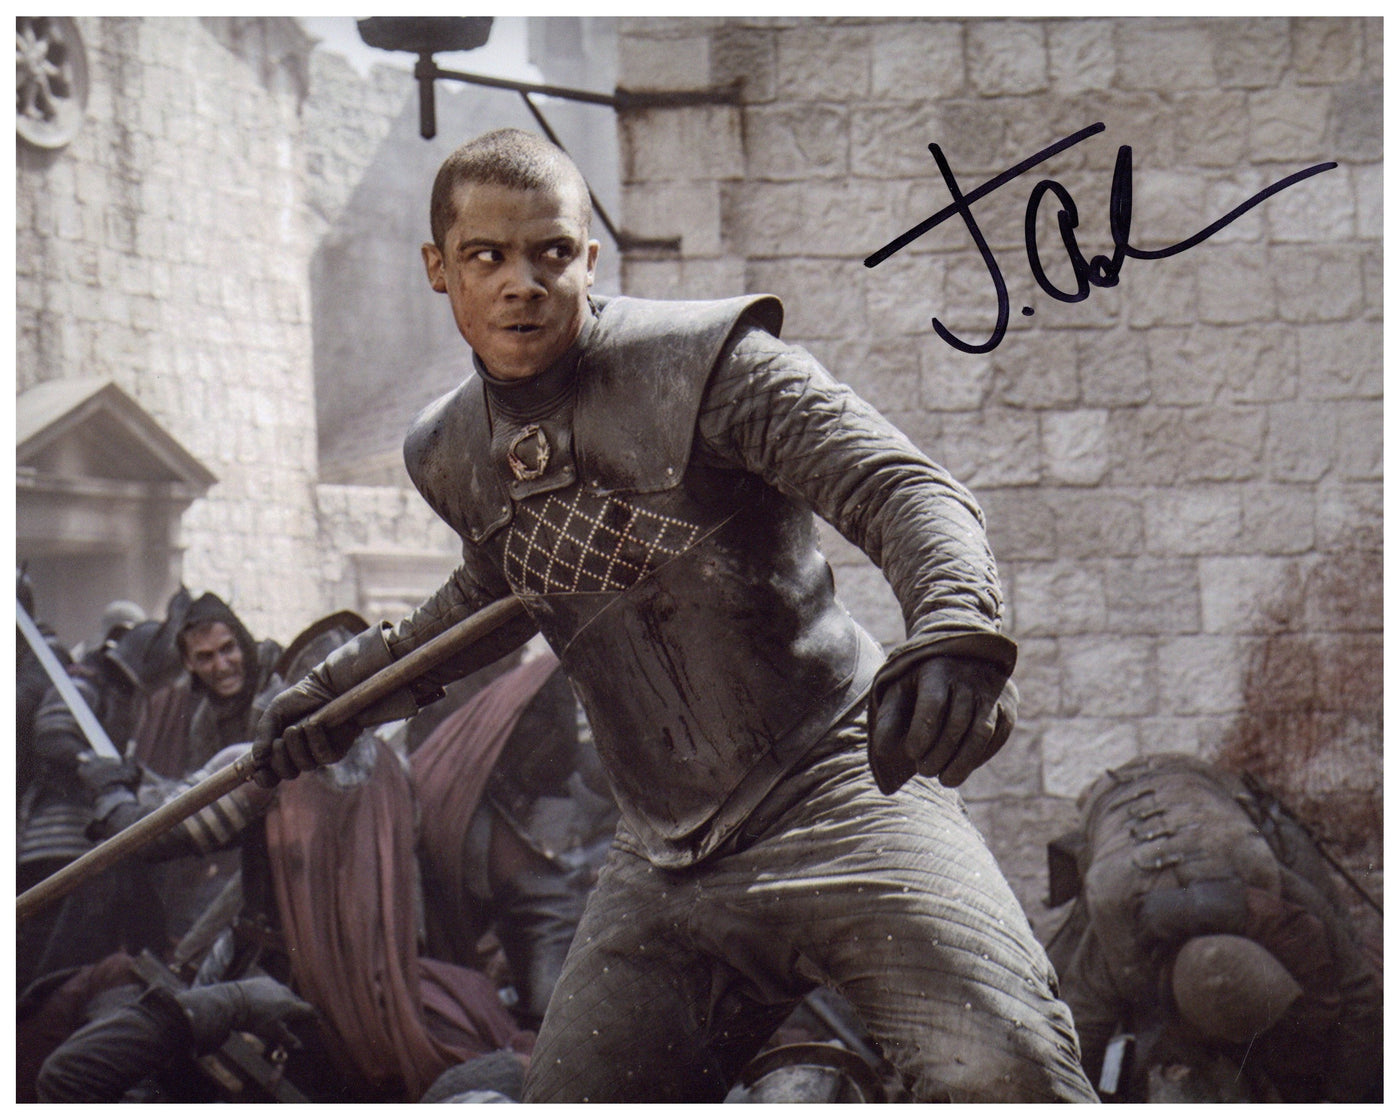 Jacob Anderson Signed 8x10 Photo Game of Thrones Grey Worm Autographed ACOA